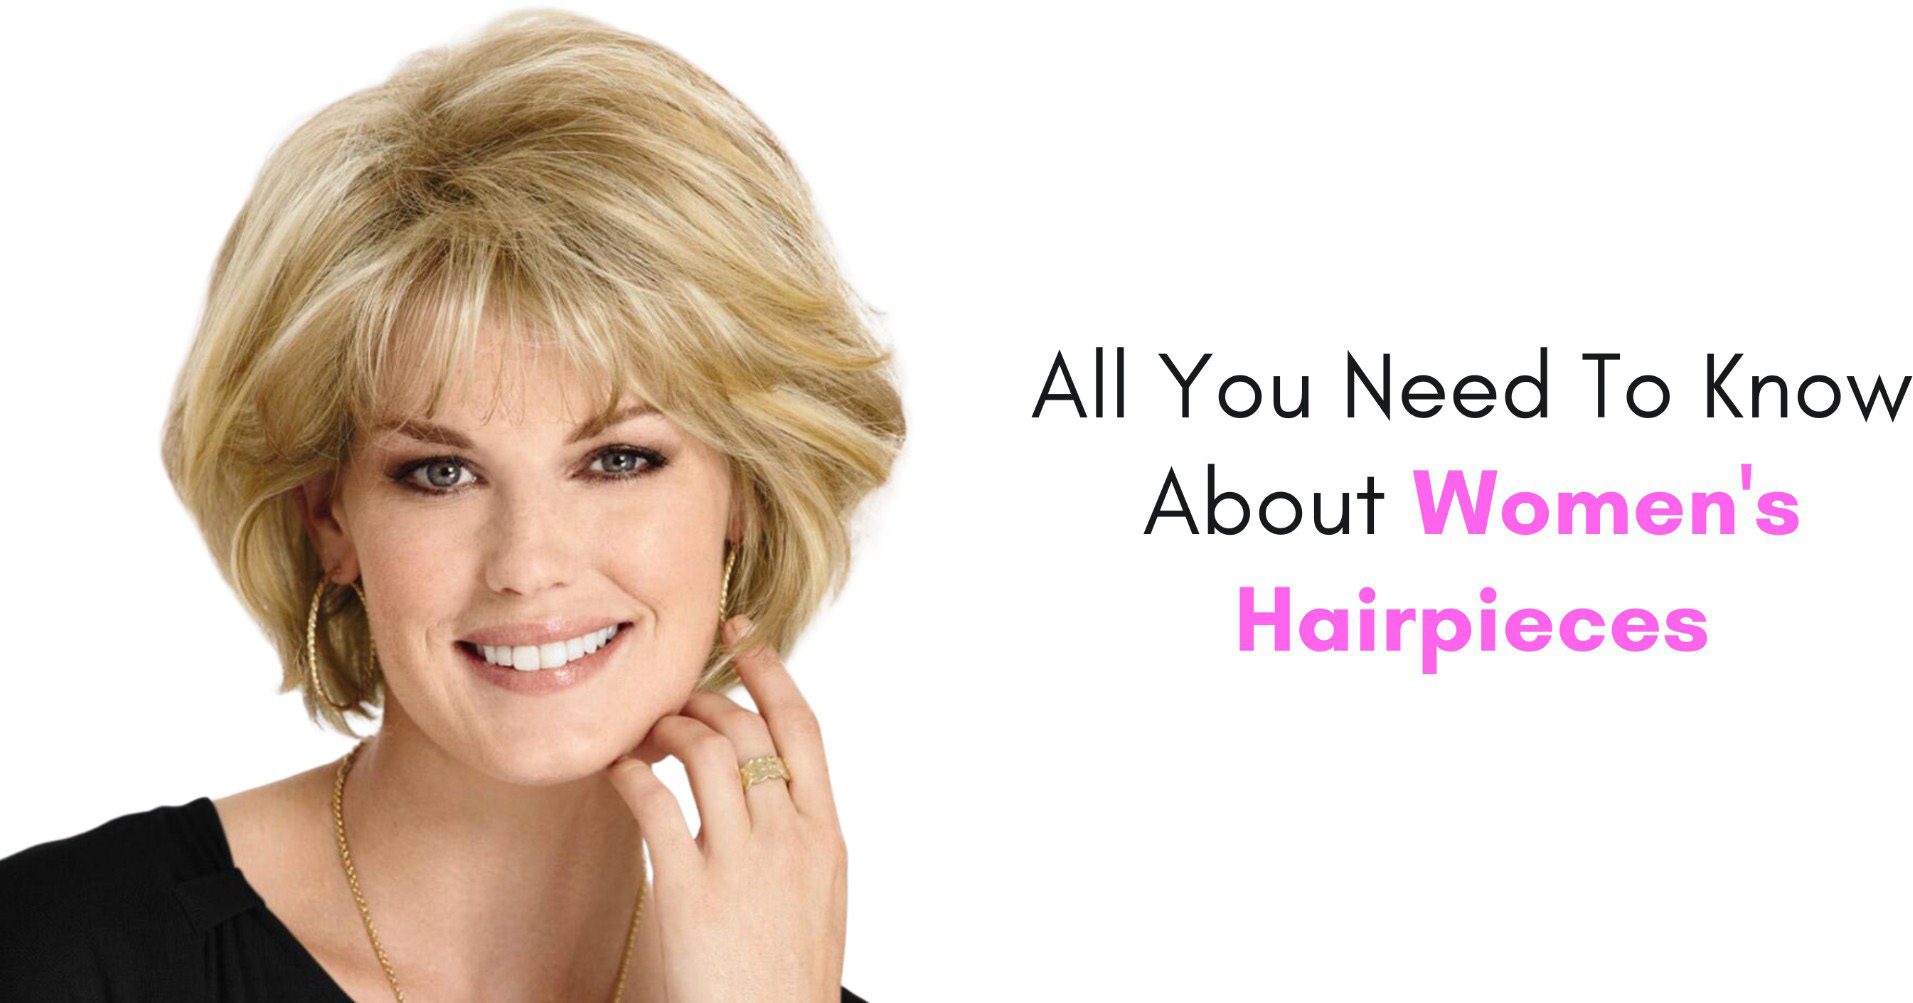 All You Need To Know About Women’s Hairpieces